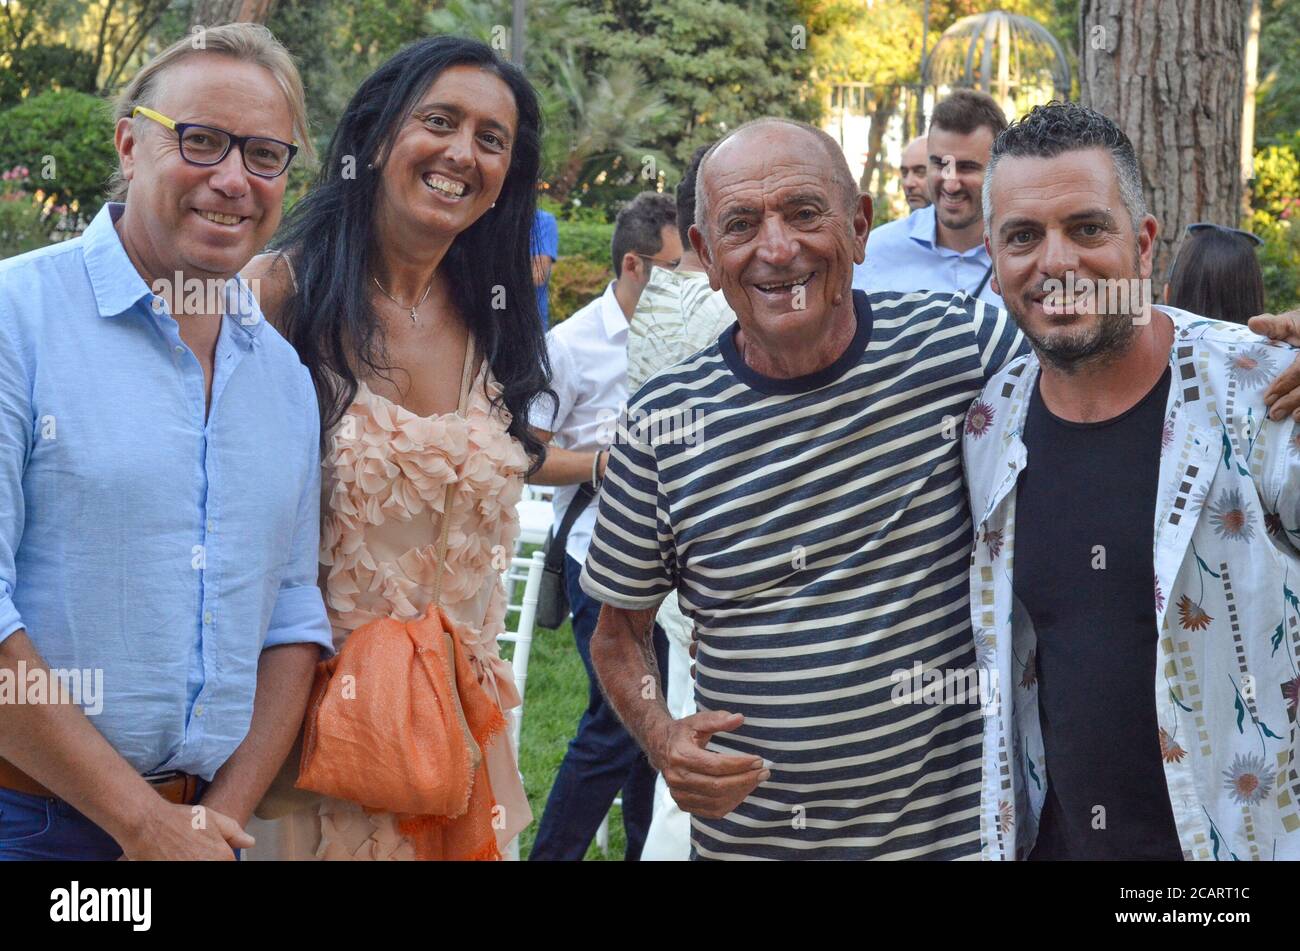 Rimini, ITA. 8th Aug, 2020. (INT) Meeting of two ICONS of Roman and Italian music. August 8, 2020, Rimini, Italy : In the splendid garden of the Grand hotel, a new meeting of La Terrazza della Dolce Vita took place where Giovanni Terzi interviewed Raoul and Mirko Casadei, two big names in Roman and Italian music.Credit: Josi Donelli/Thenews2 Credit: Josi Donelli/TheNEWS2/ZUMA Wire/Alamy Live News Stock Photo